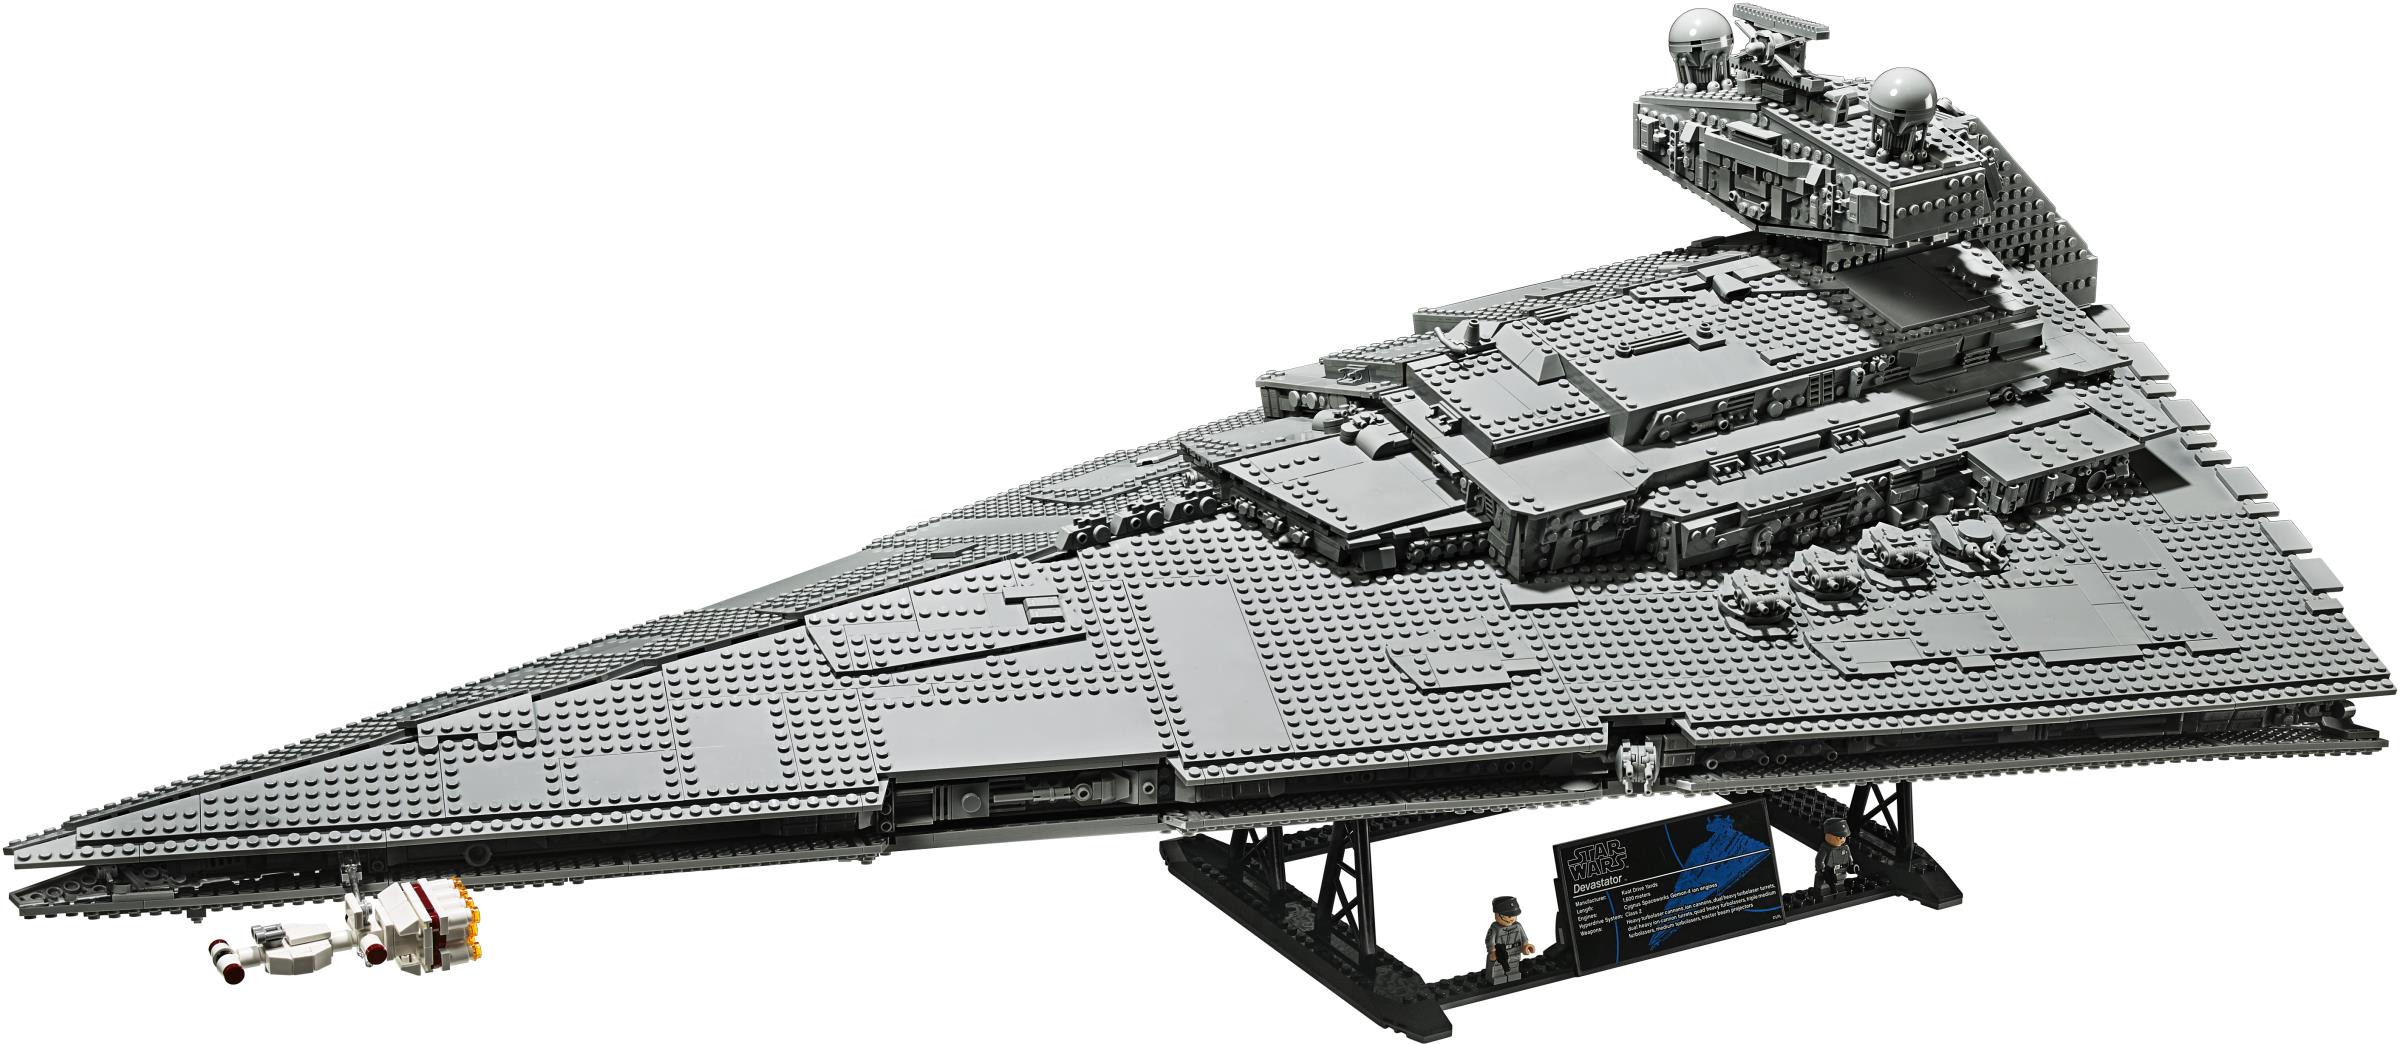 Lego Star Wars super star destroyer set: Price, release date and more